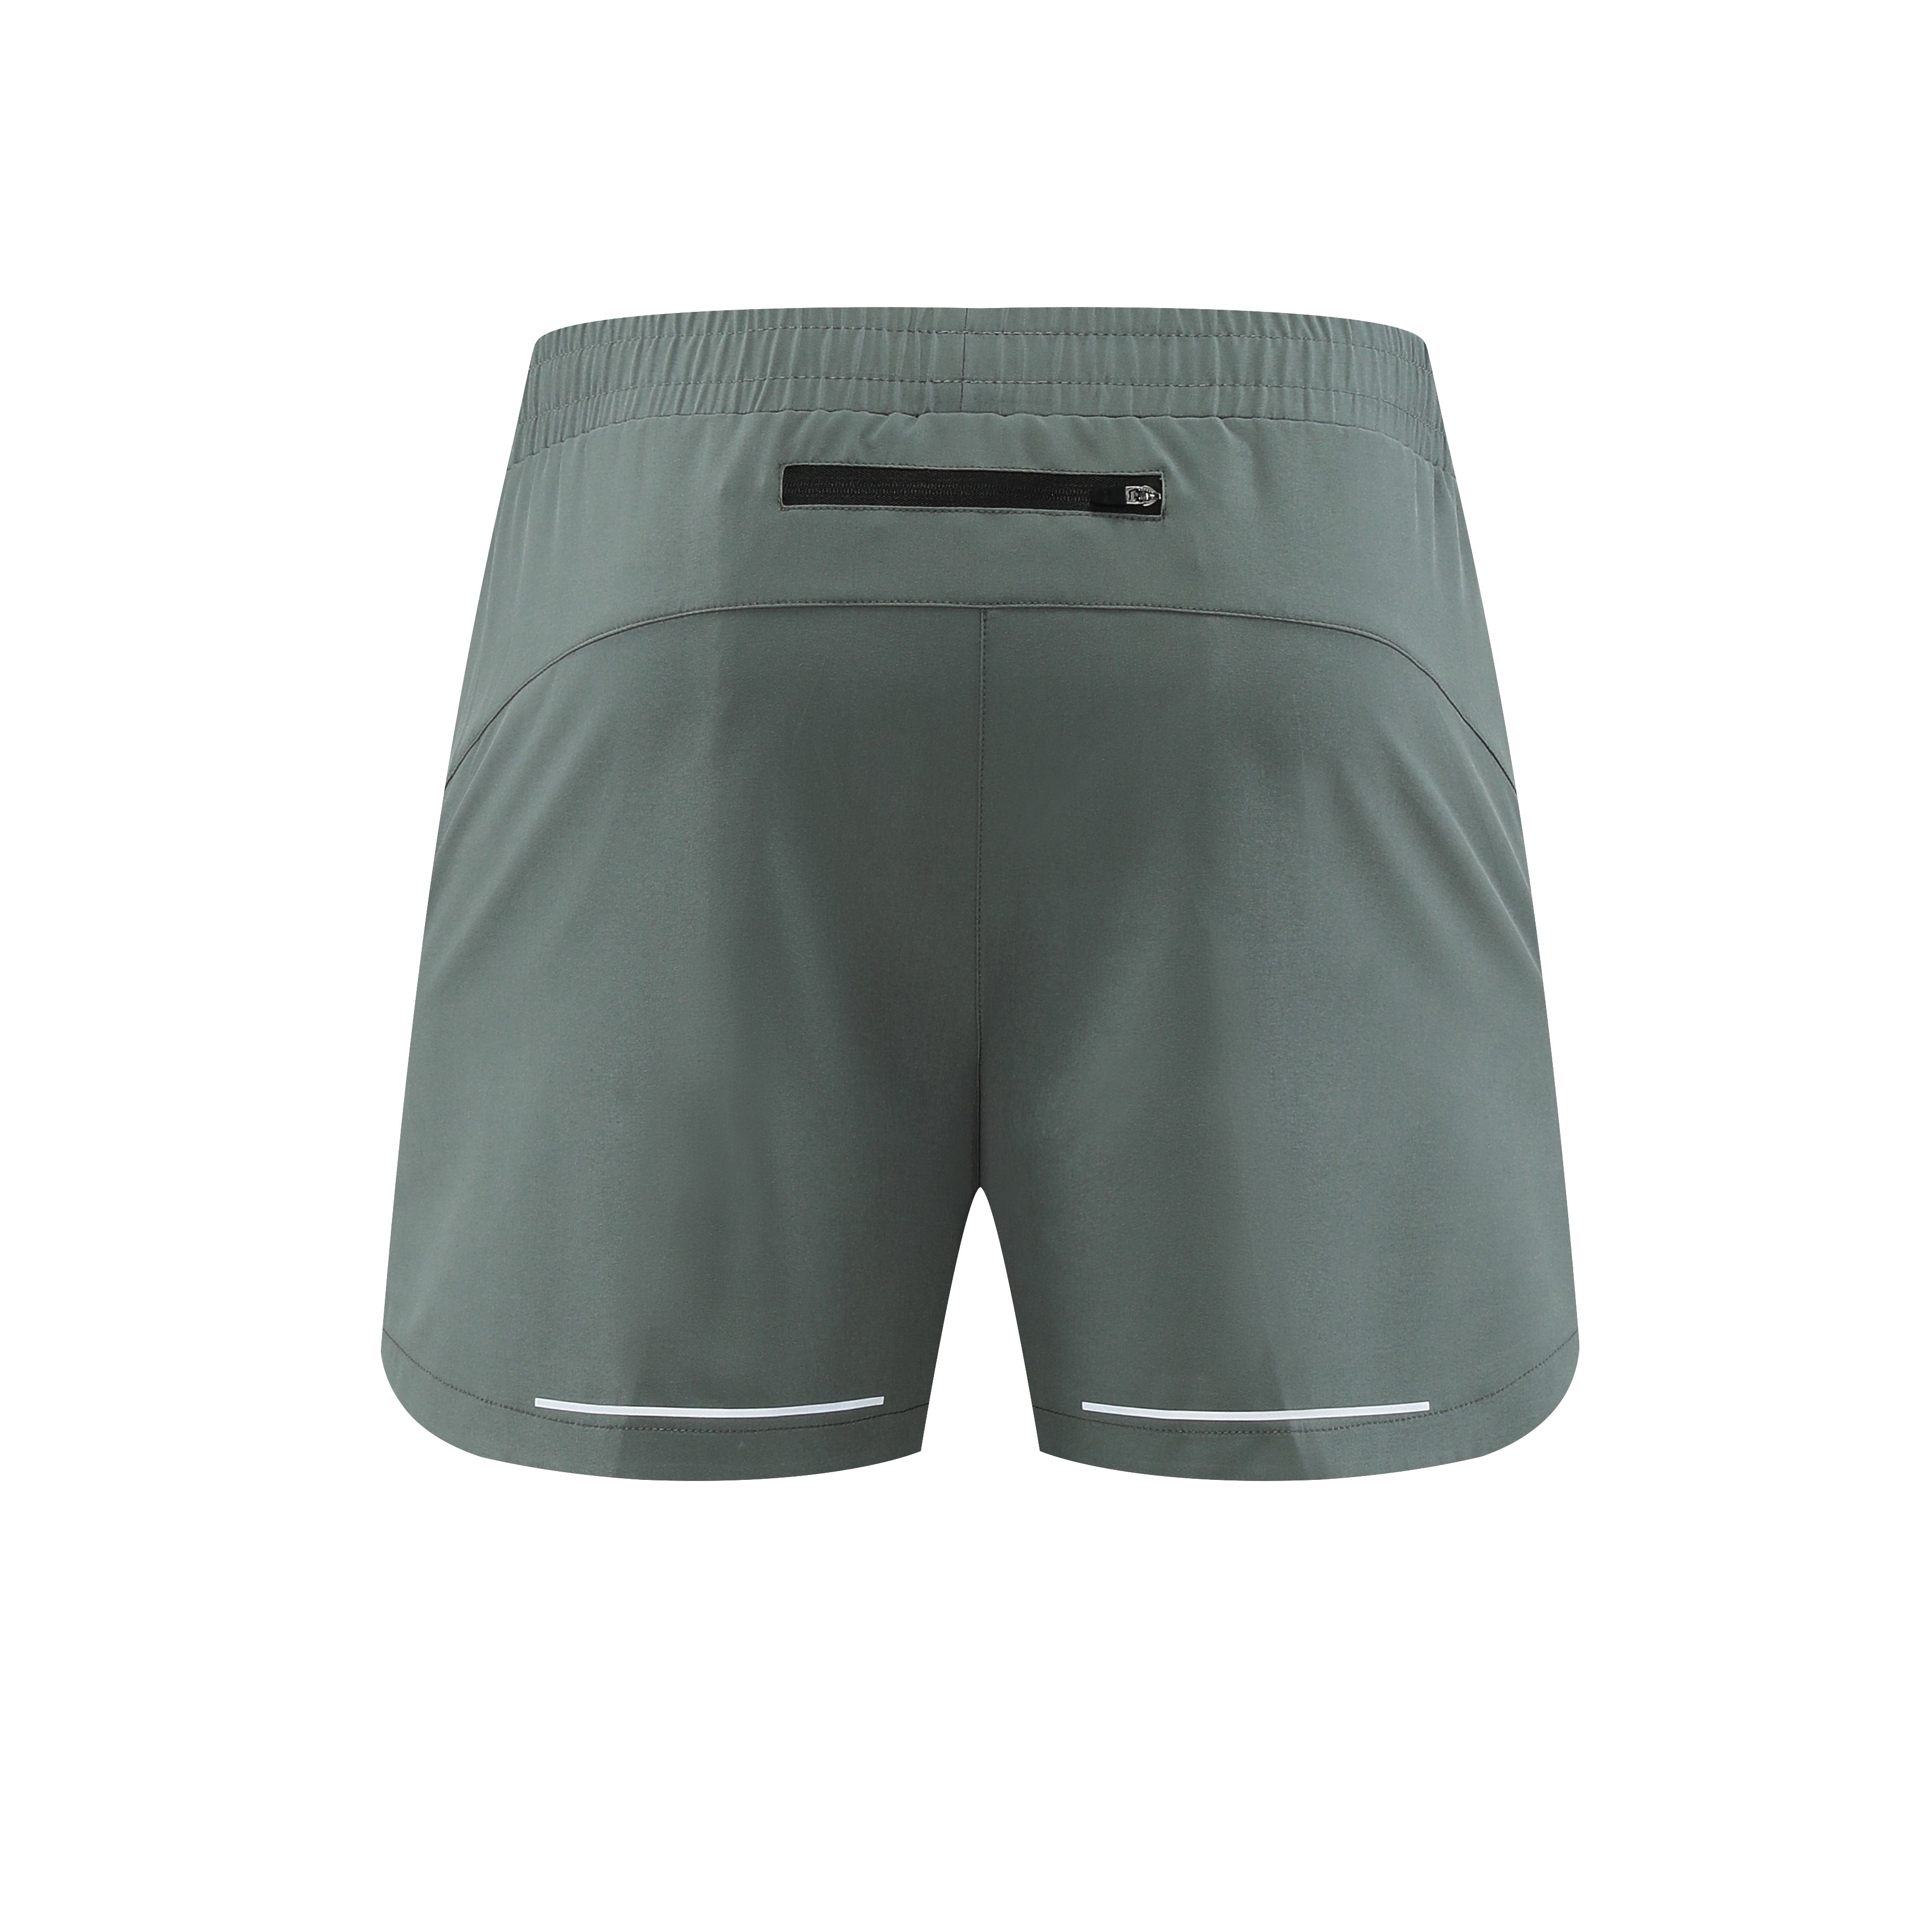 Men's Quick Dry Super Daddy Graphic Shorts